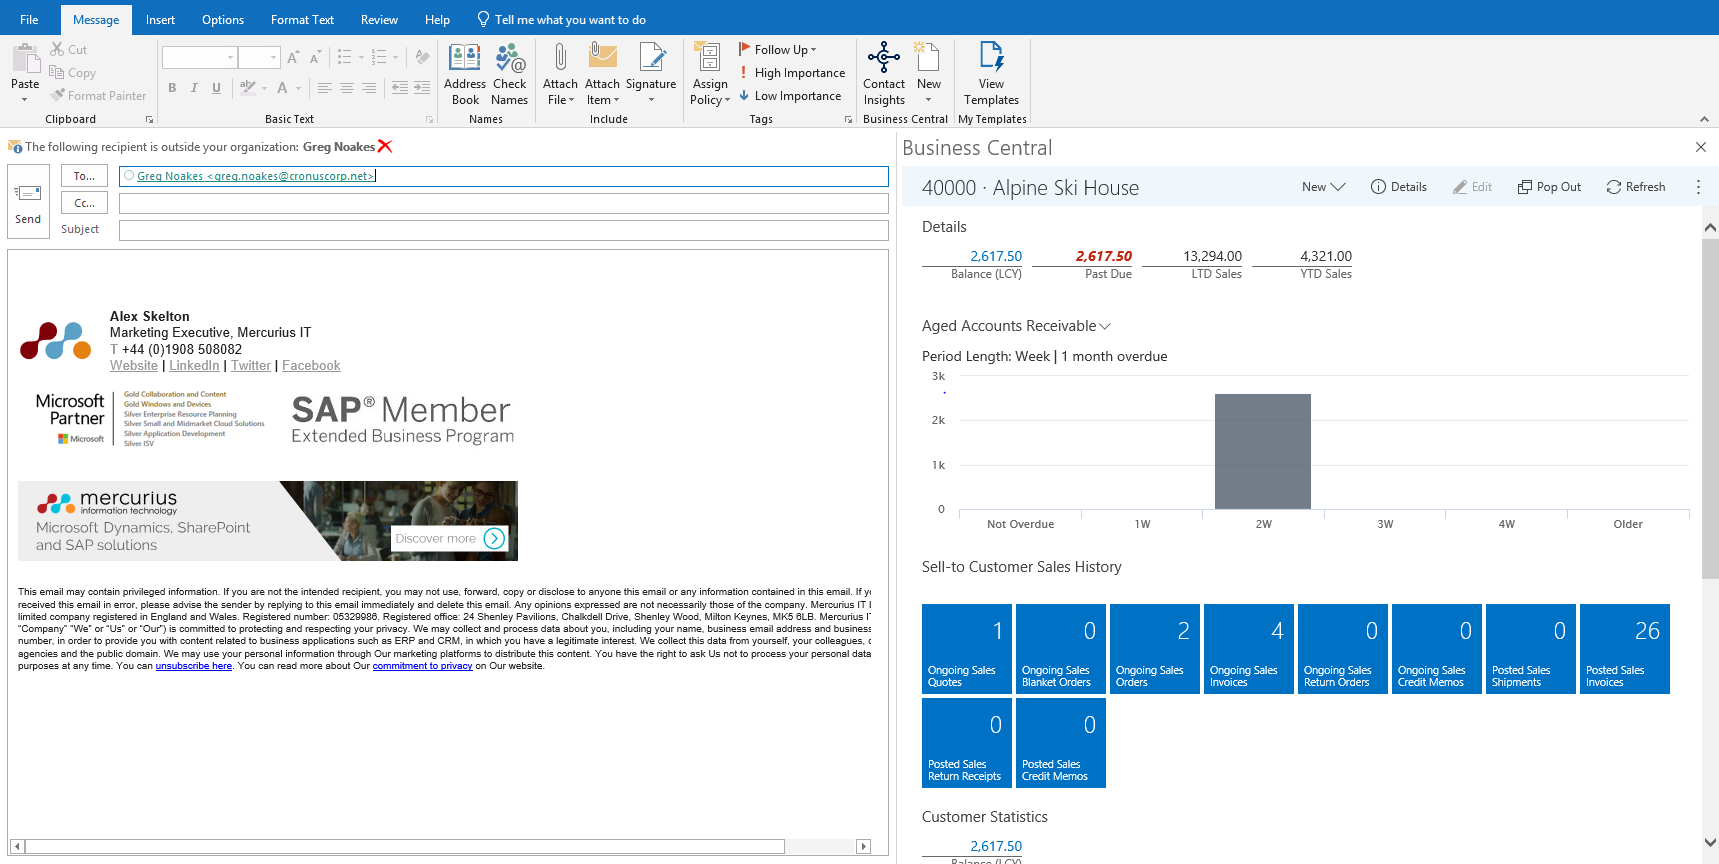 Outlook client with Dynamics 365 Business Central contact insights